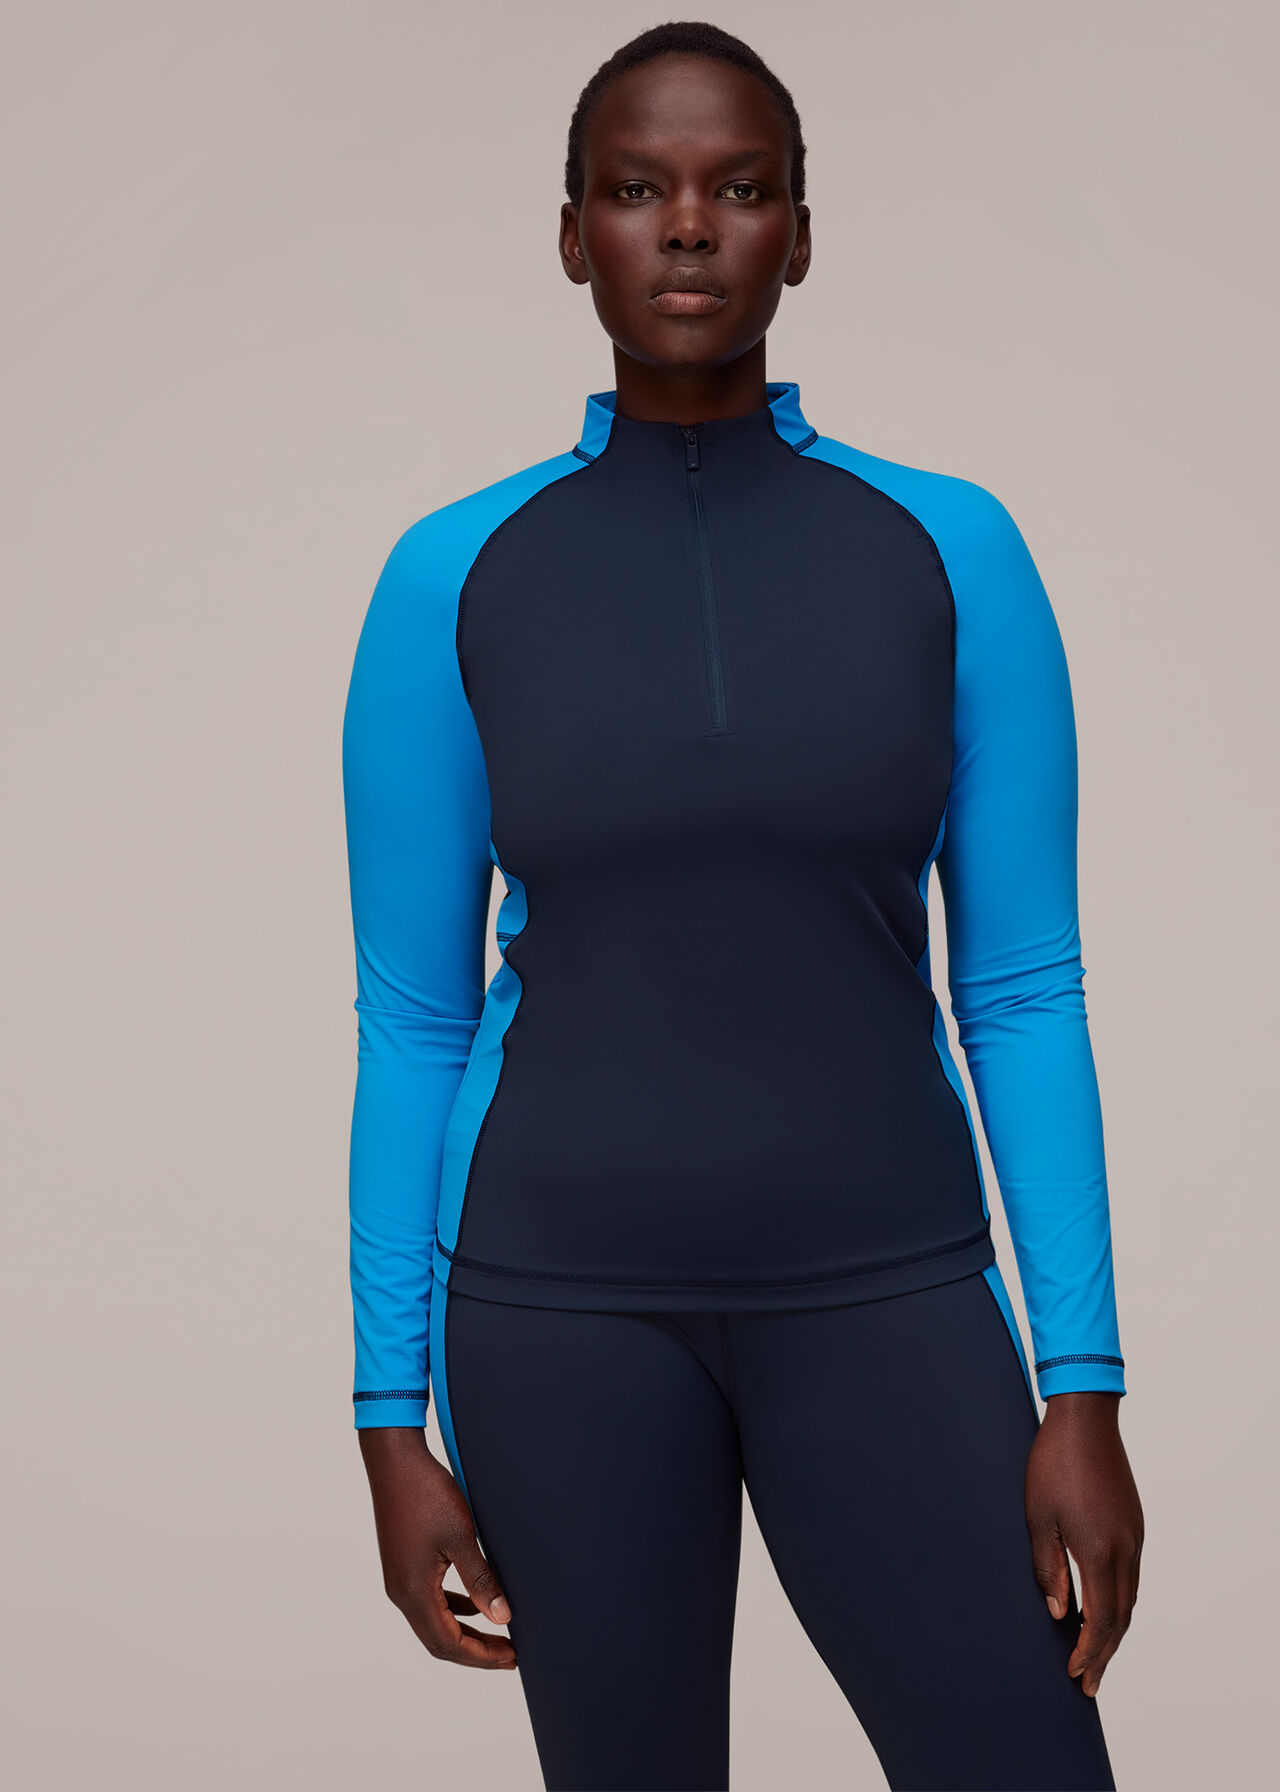 Panel Layer Sports Top